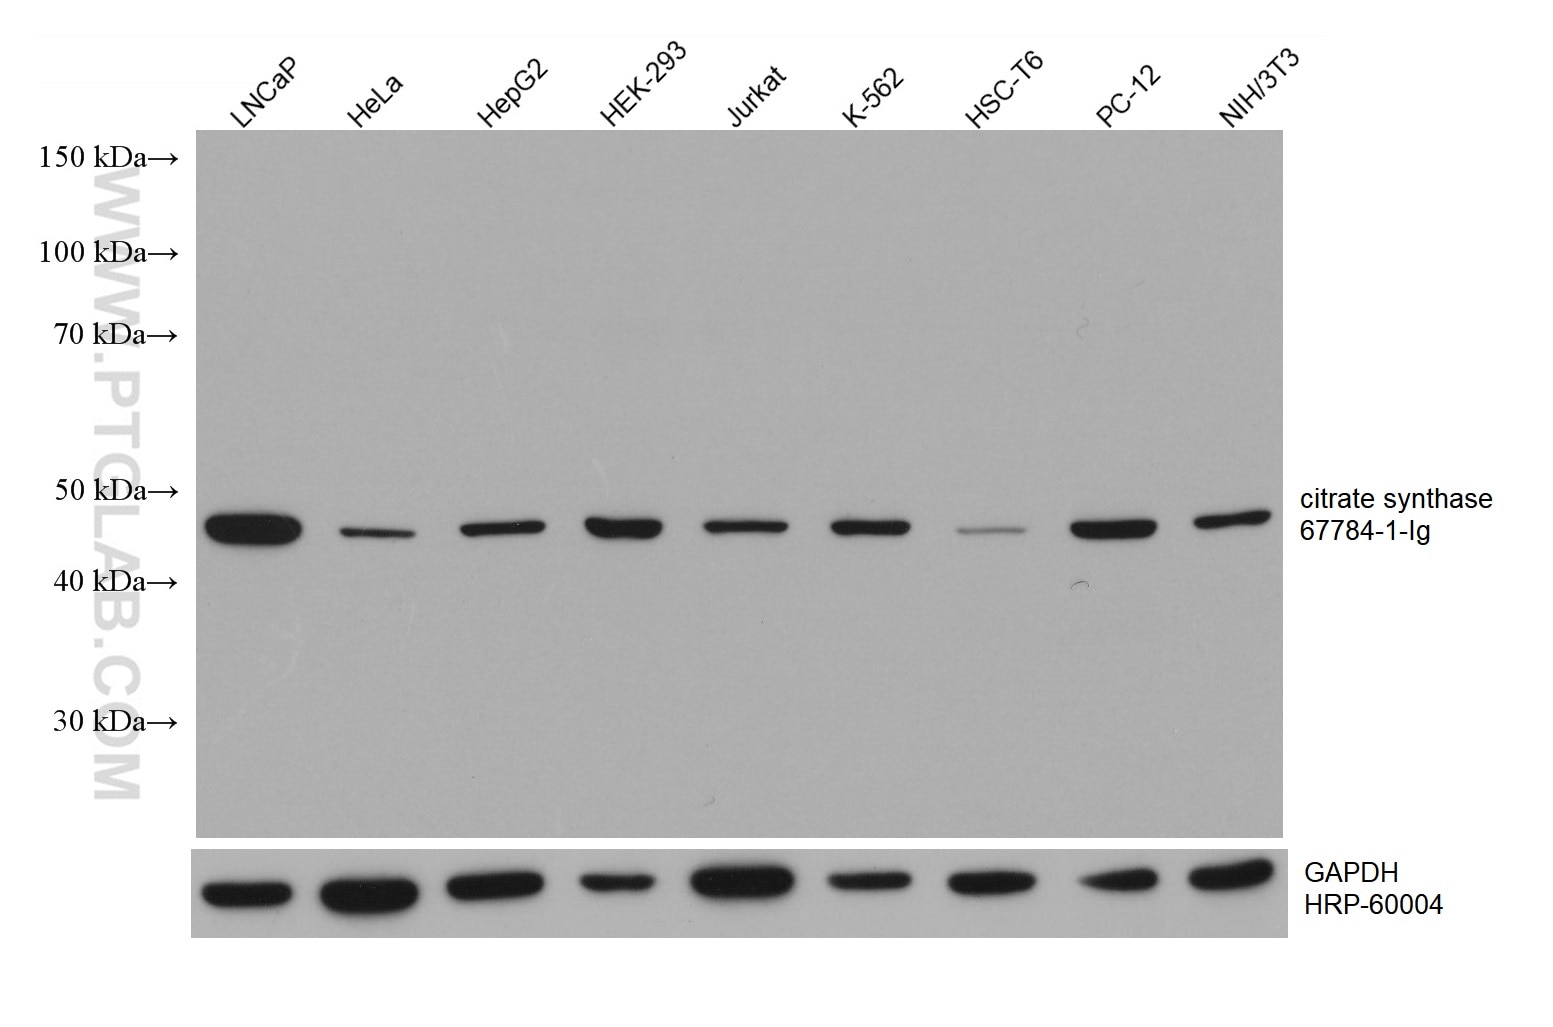 Western Blot (WB) analysis of LNCaP cells using citrate synthase Monoclonal antibody (67784-1-Ig)